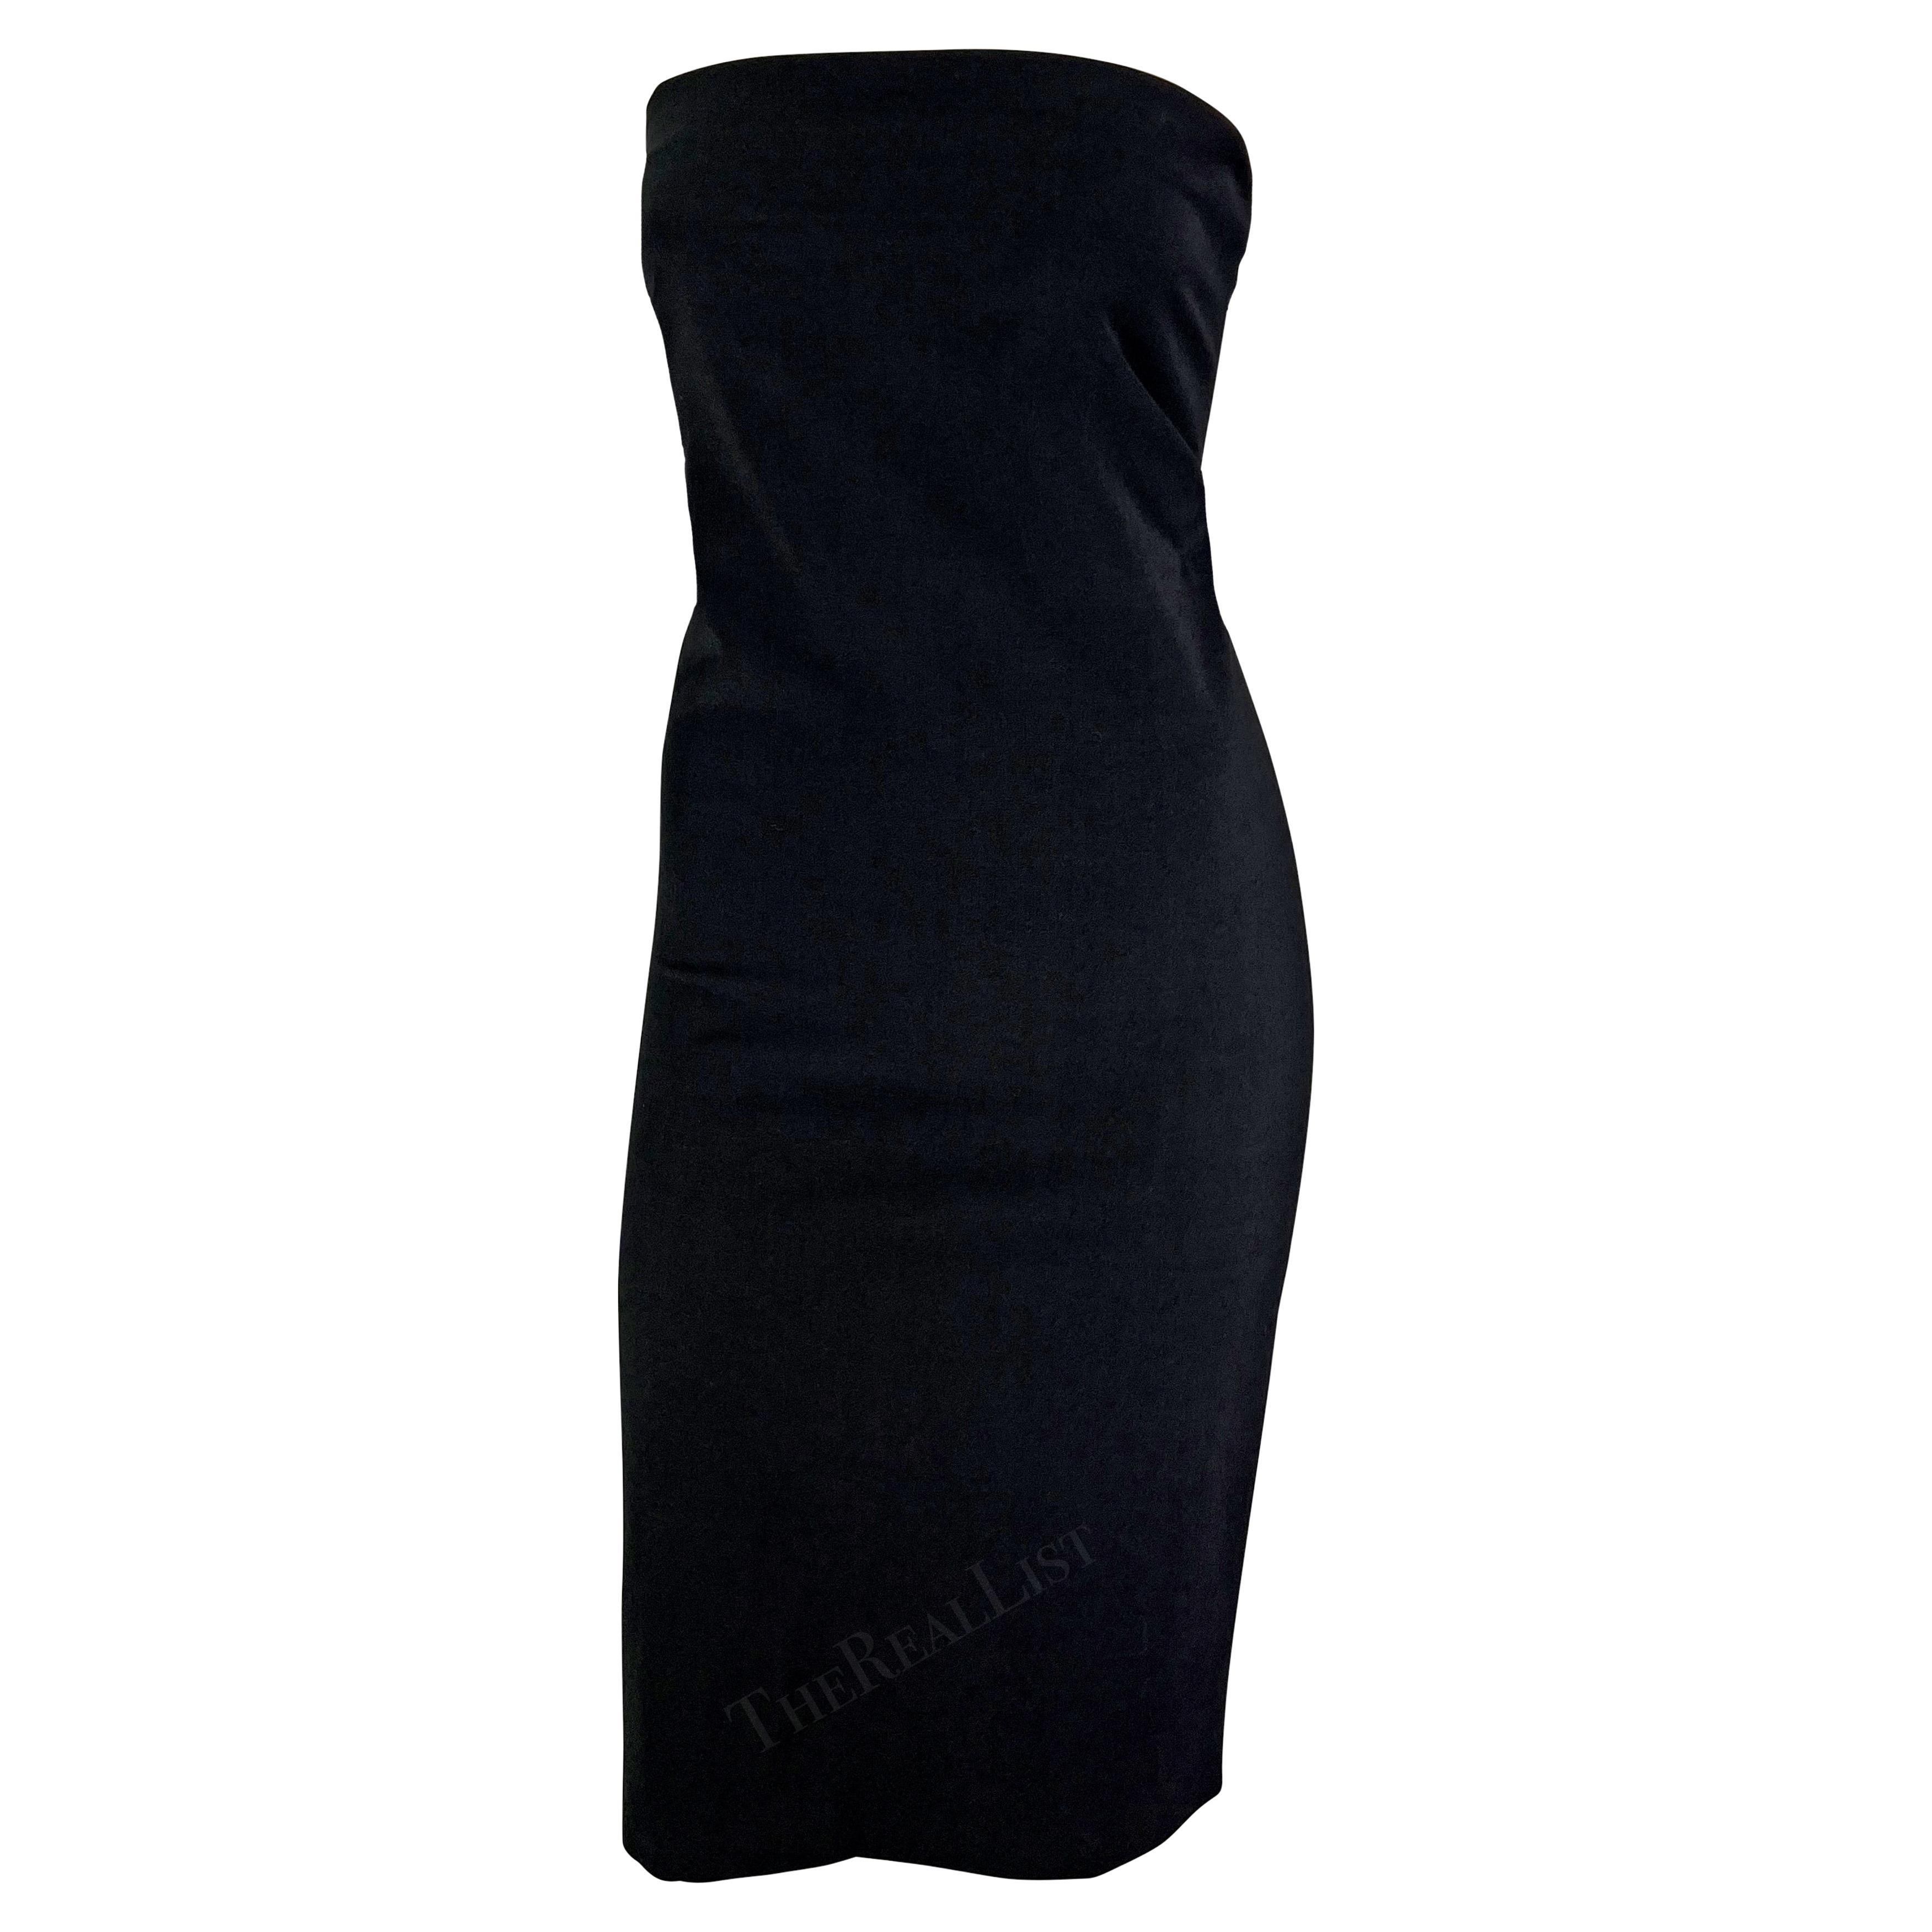 S/S 1997 Gucci by Tom Ford Black Strapless Bodycon Mini Dress  For Sale